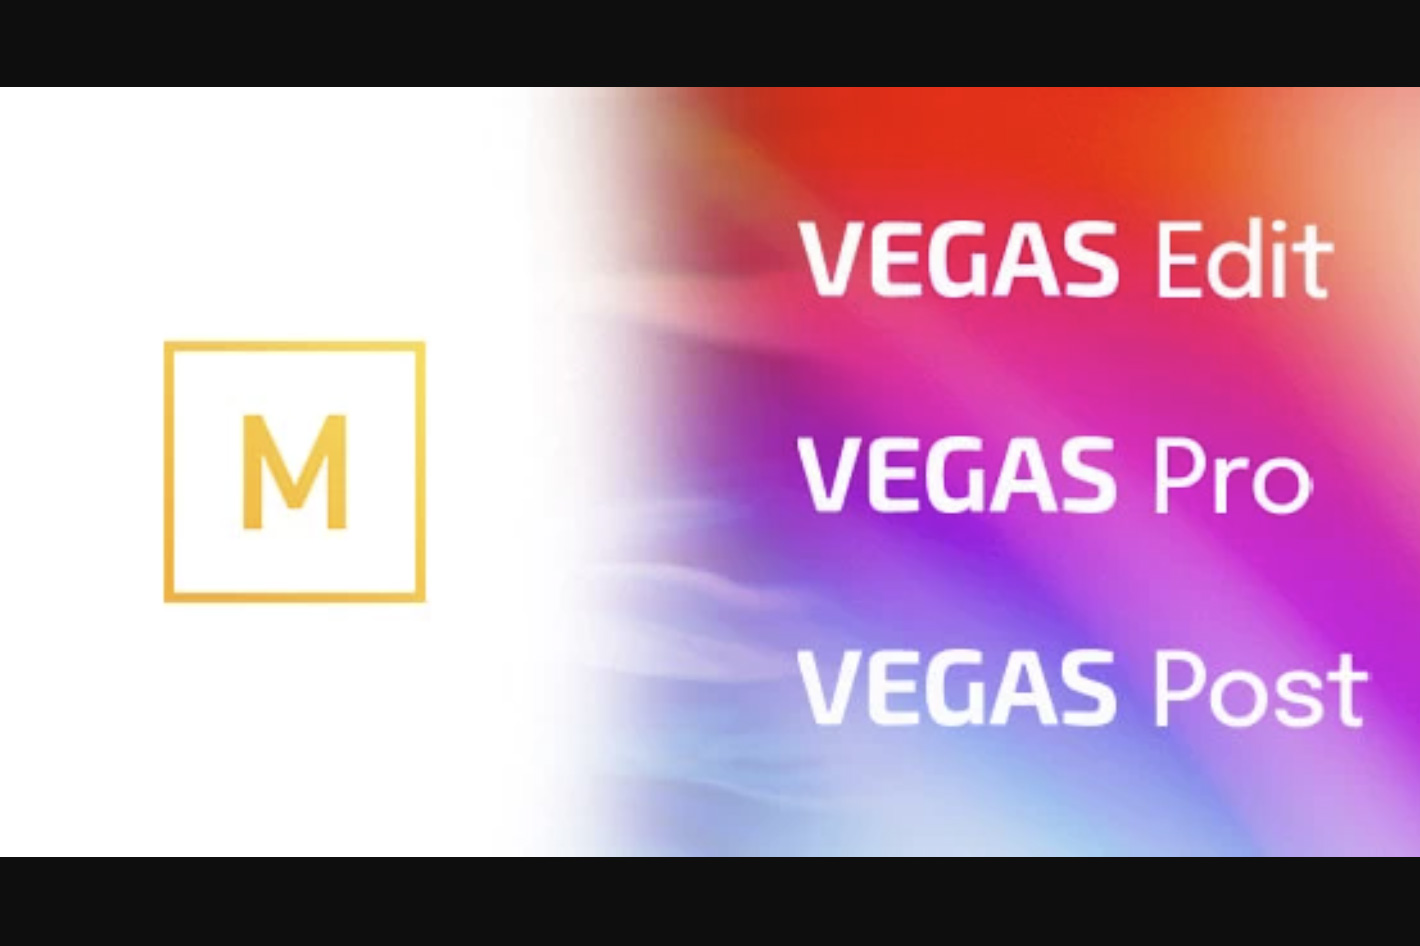 VEGAS Pro: new update enhances color grading and more